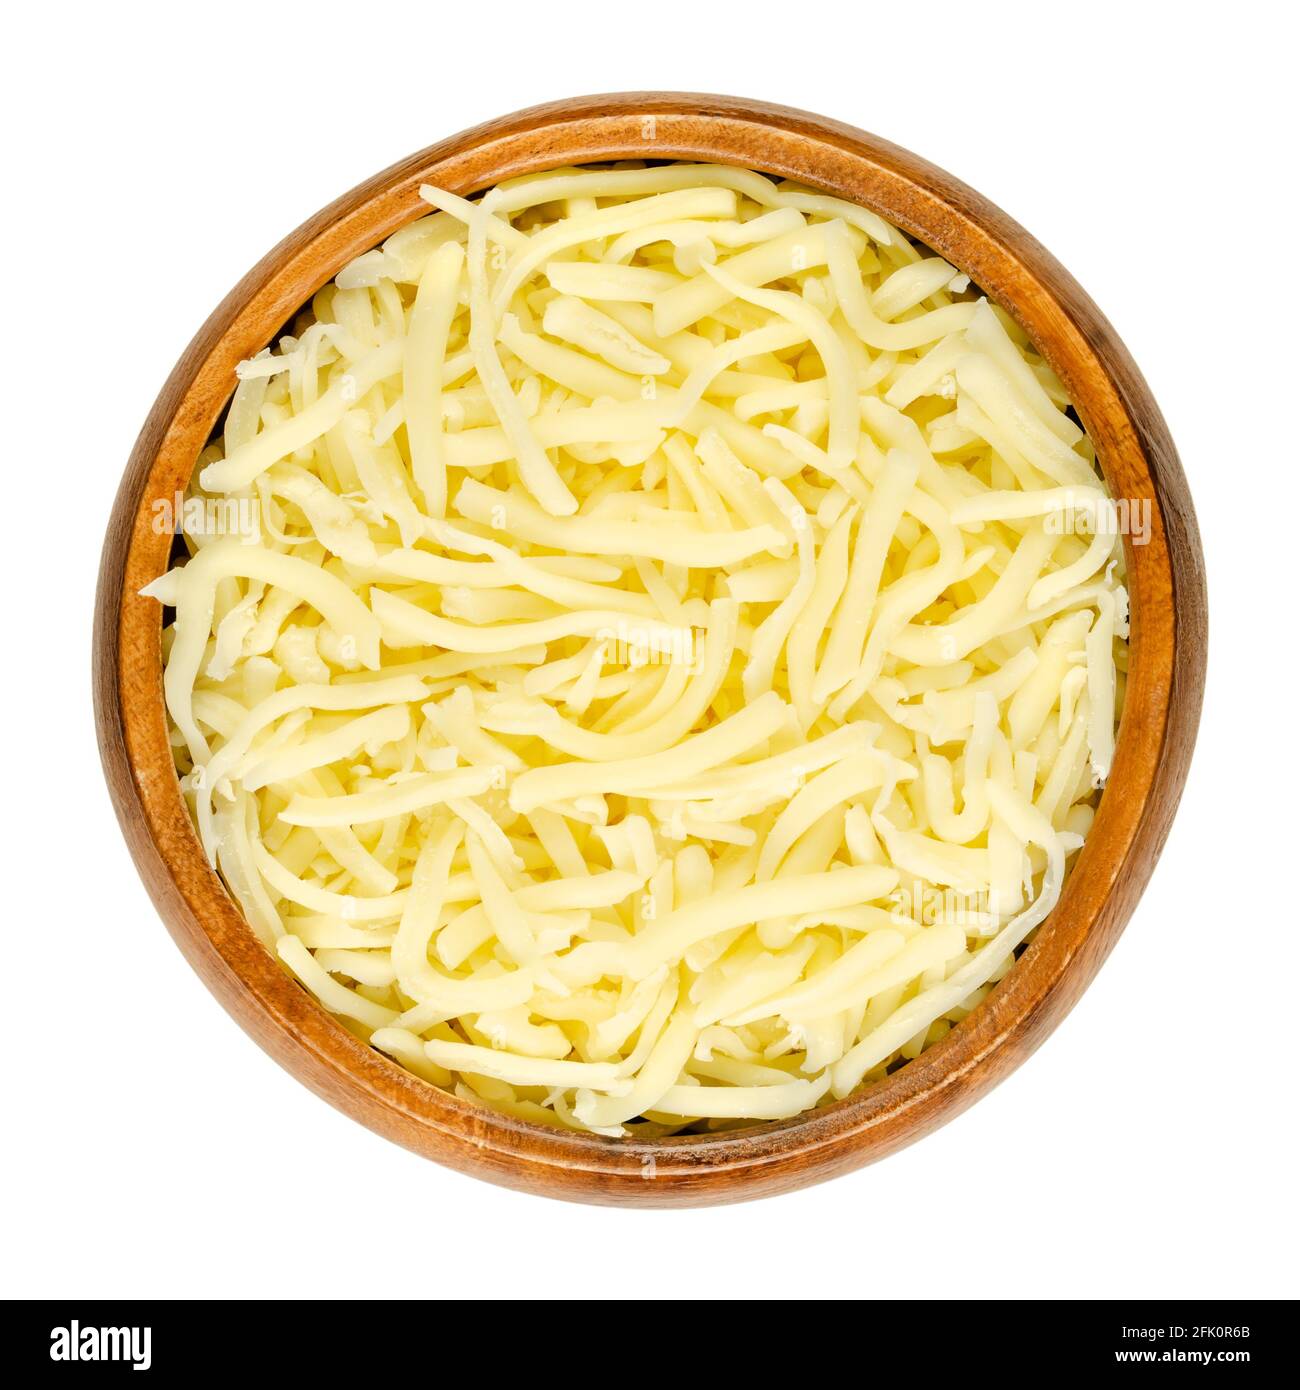 Grated pizza cheese, in a wooden bowl. Softly melting, shredded semi-hard cheese, made of pasteurized milk, rolled in starch to avoid sticking. Stock Photo